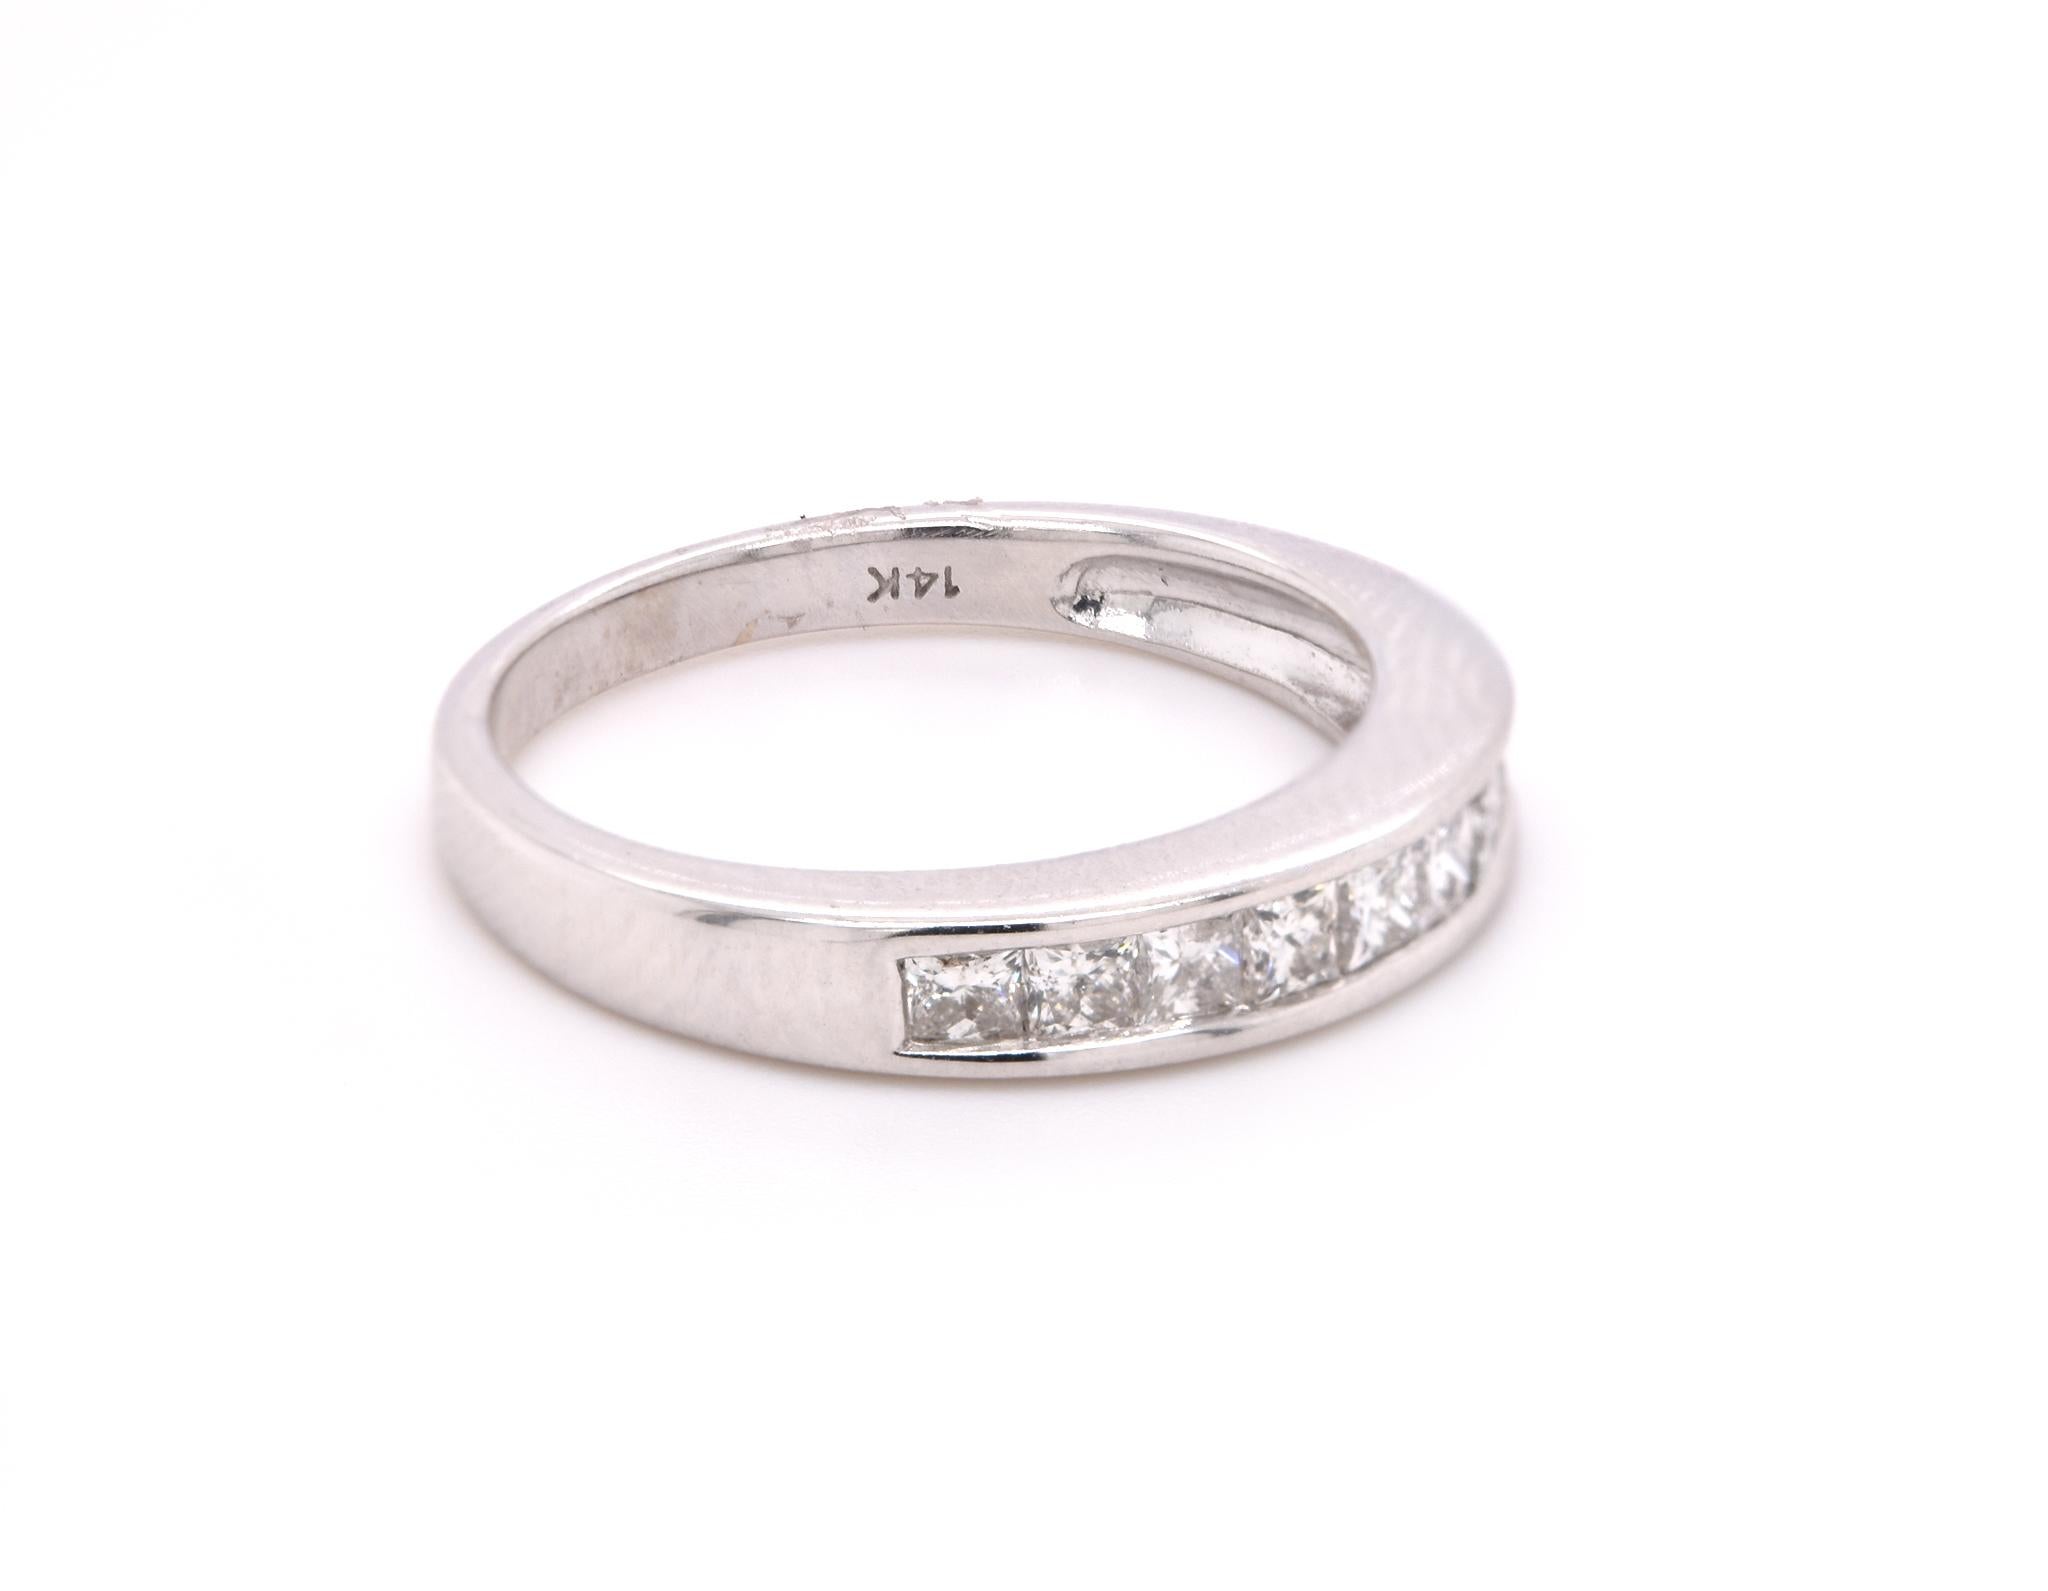 
Designer: custom design
Material: 14k white gold
Diamonds: 9 princess cut = .65cttw
Color: H
Clarity: SI1
Ring size: 6
Weight: 3.03 grams 
